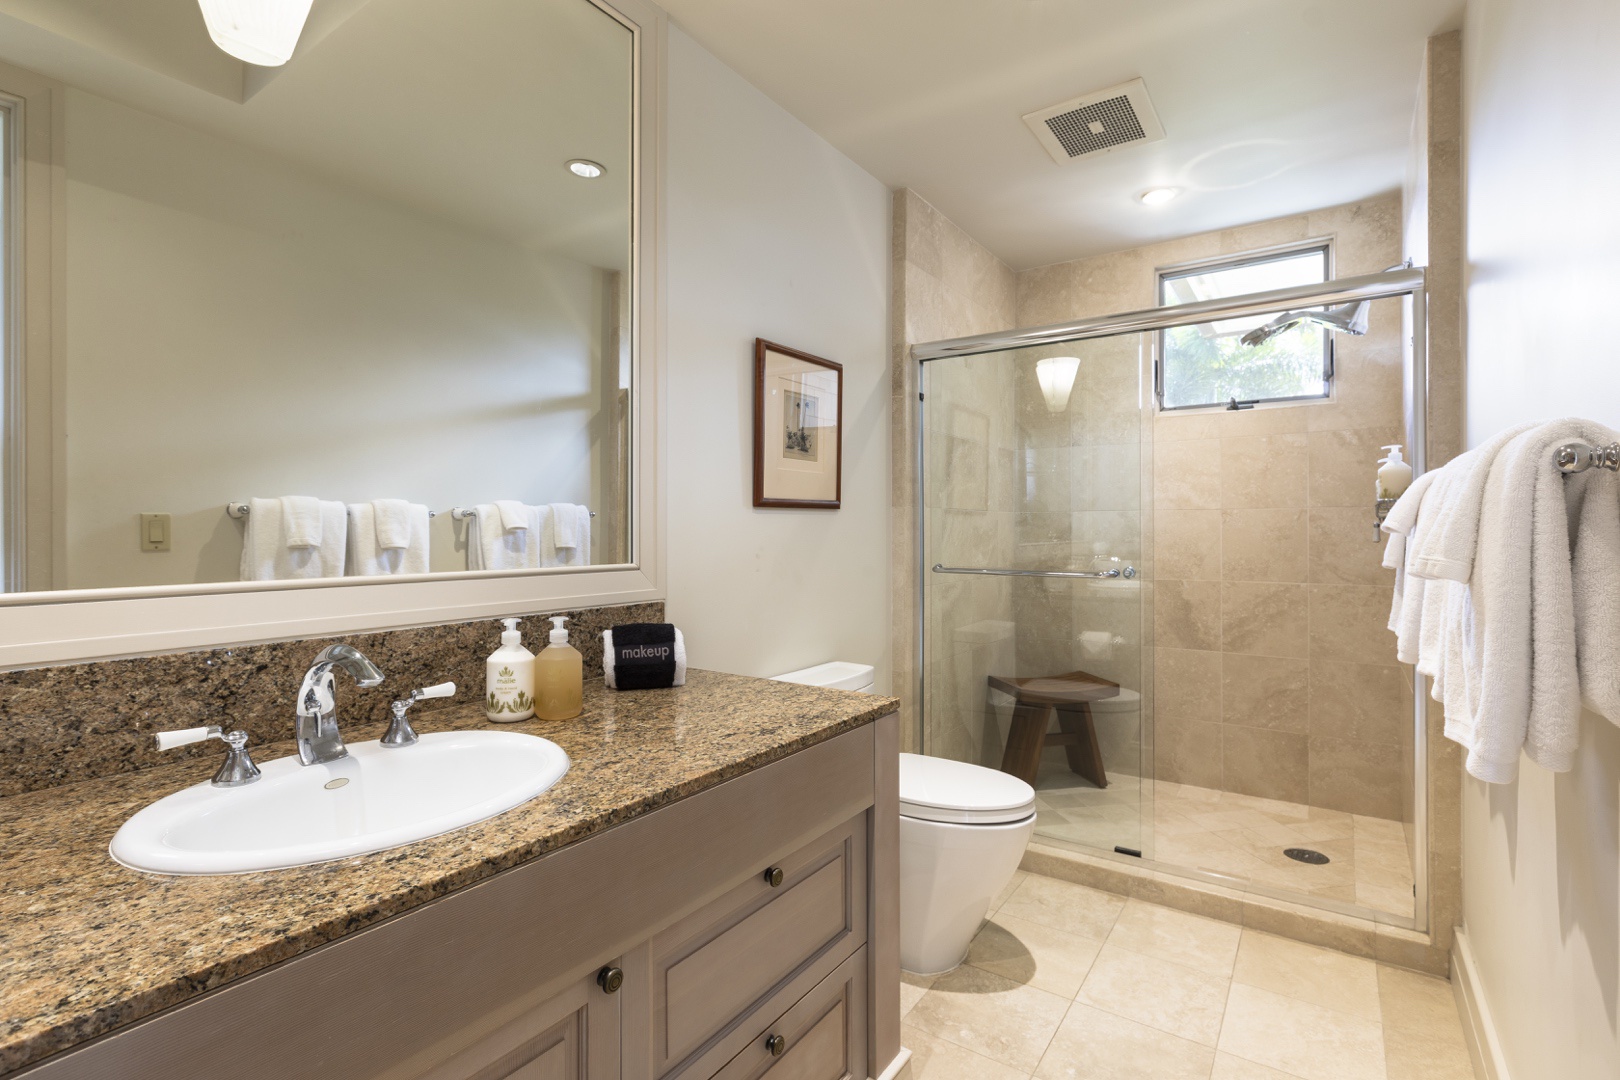 Kailua Kona Vacation Rentals, 3BD Palm Villa (130B) at Four Seasons Resort at Hualalai - Adjacent to the third bedroom is a full bathroom with a walk-in shower